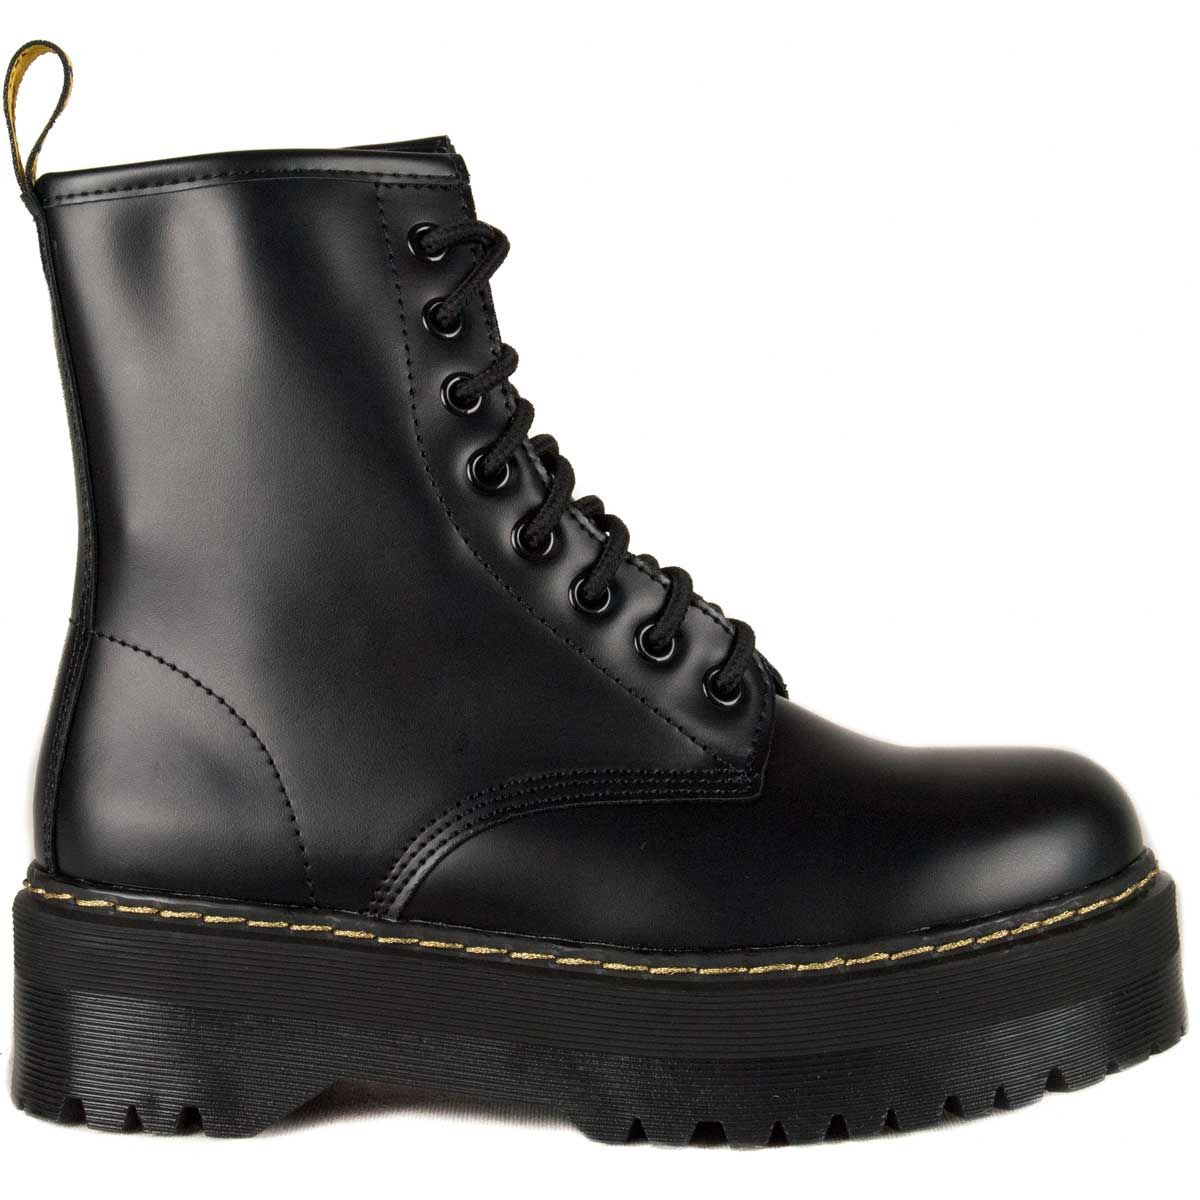 Modern black military-style boot with fine cord cord and metallic metallic buttonholes in black. The platform stands out for a fun sewn in Dorado, also has a black ribbon with yellow letters on top of the cane, which gives it an original touch. Easy to clean material. Padded textile. Hound comfortable. Sole and anti-slip rubber platform with tacos. If you like punk style and you want to go comfortable, this boot is the best option for your comfort in daily use.